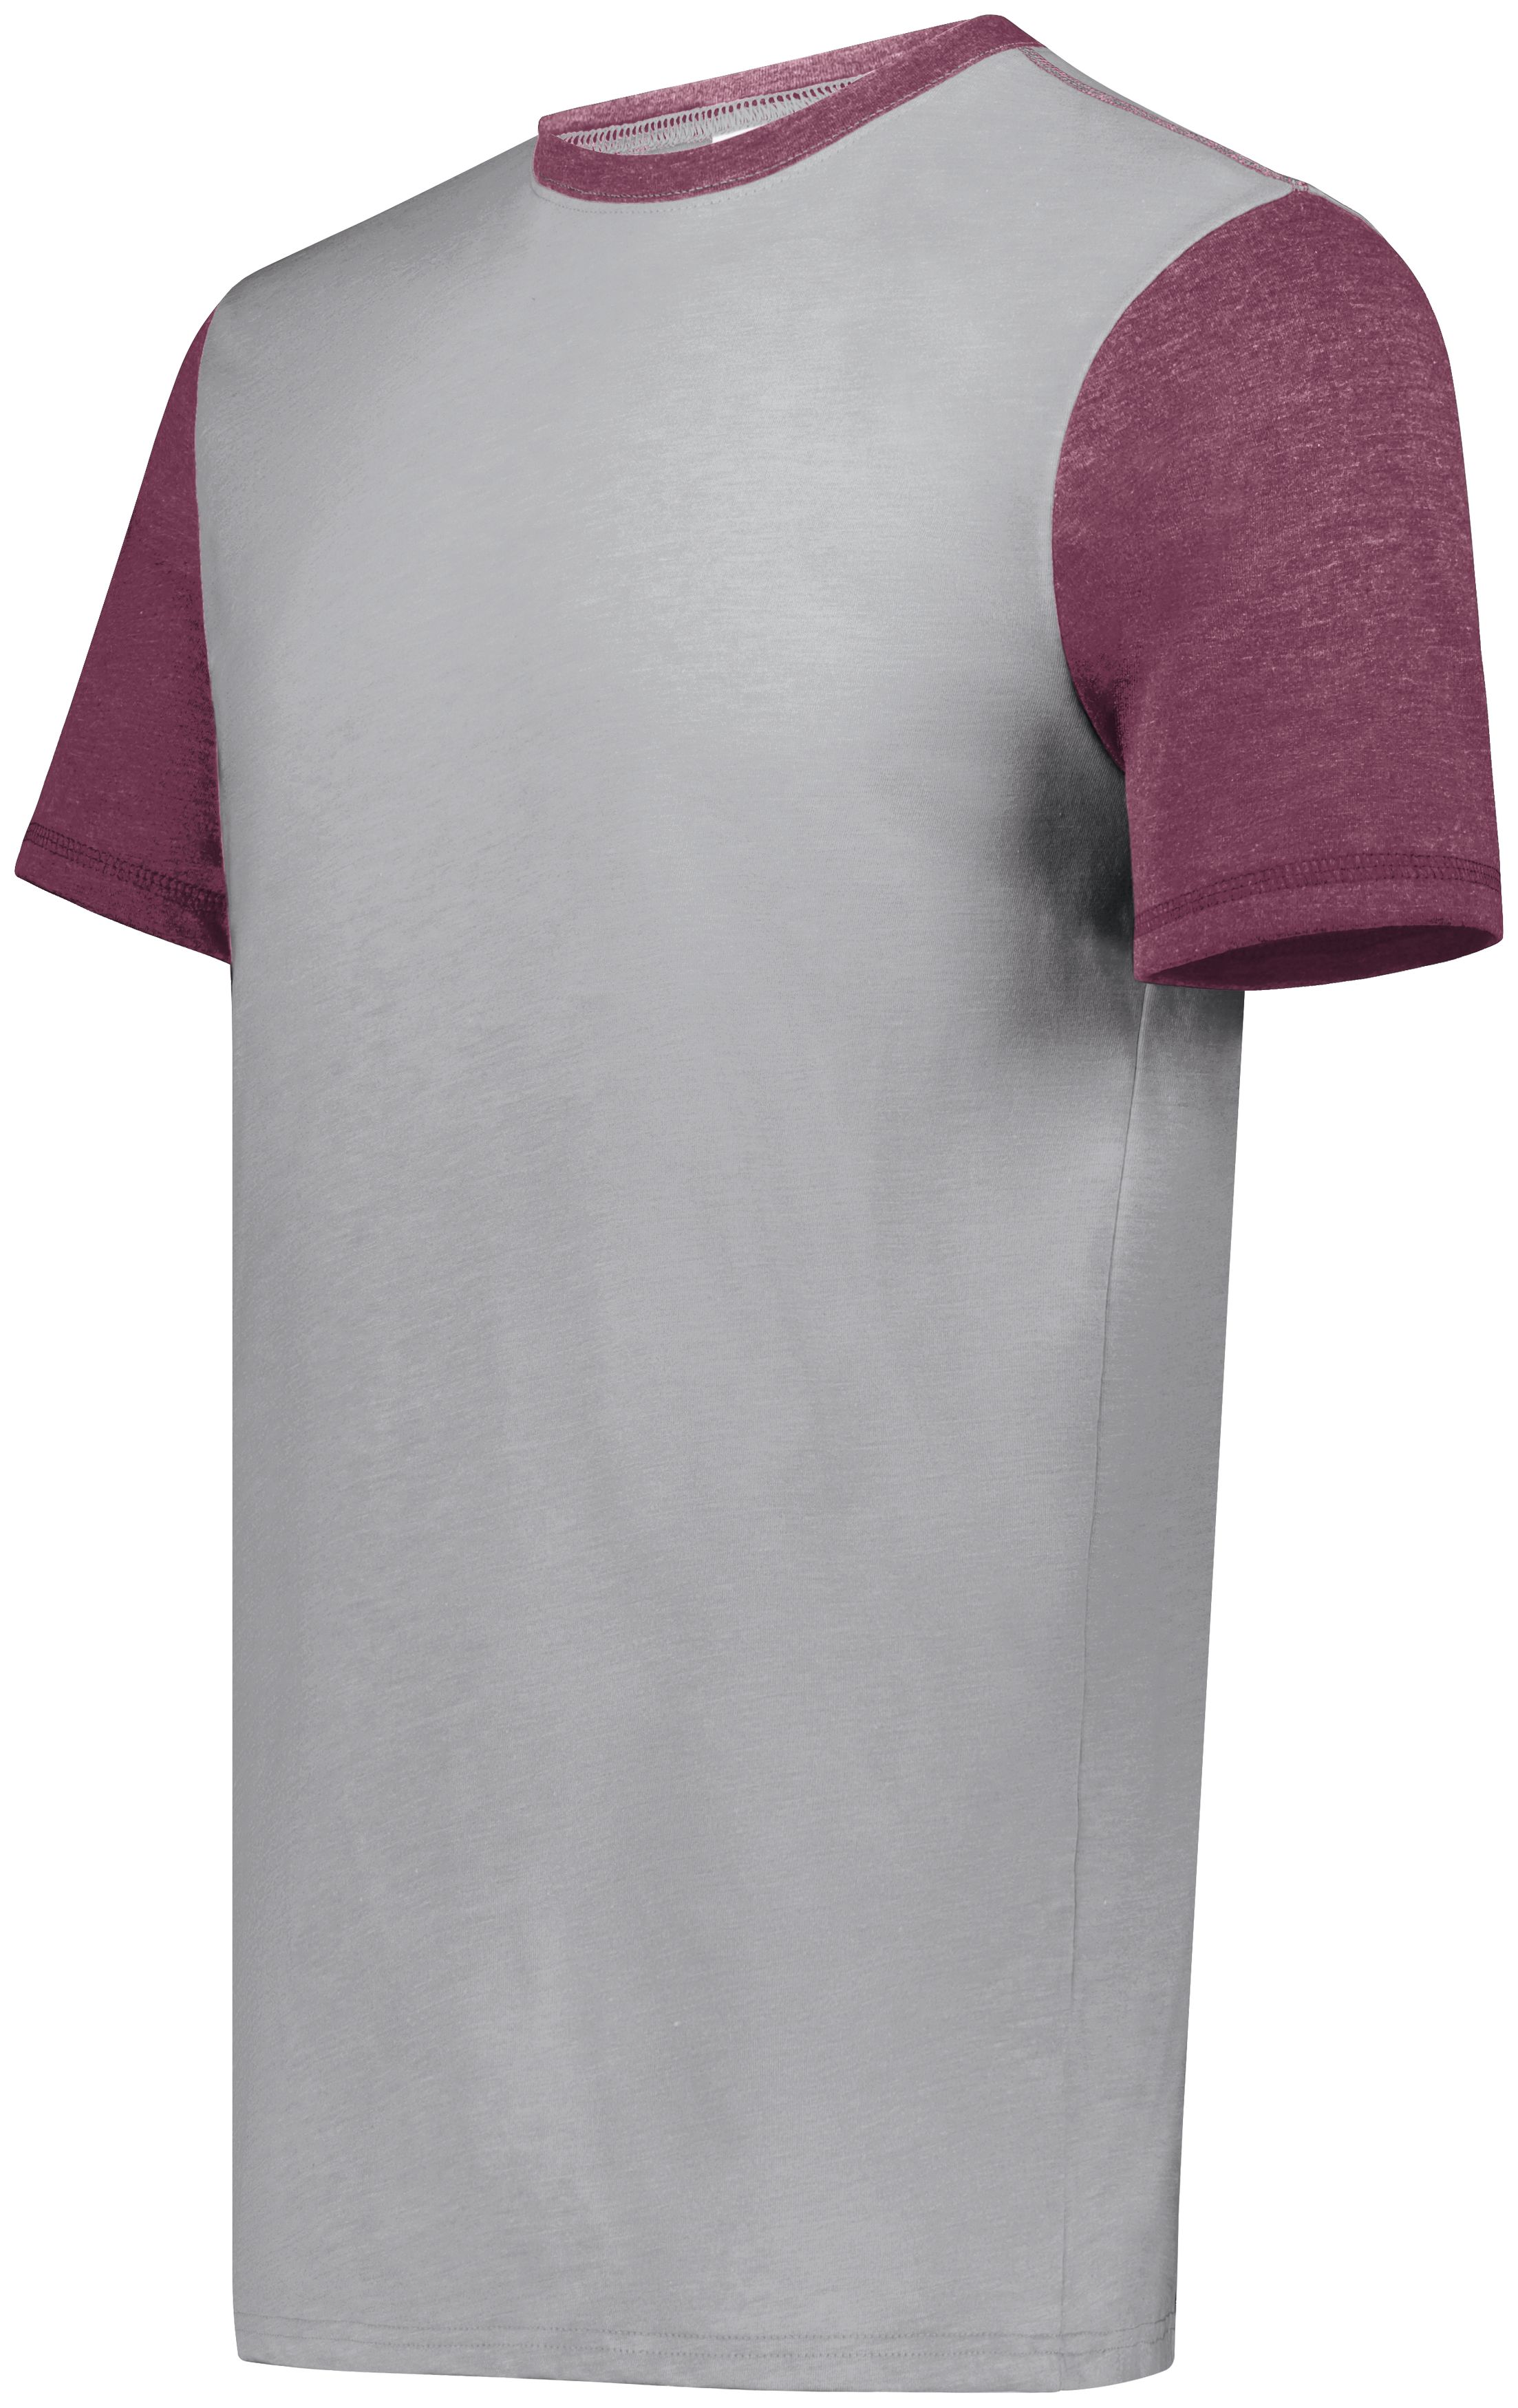 click to view Grey Heather/Maroon Heather